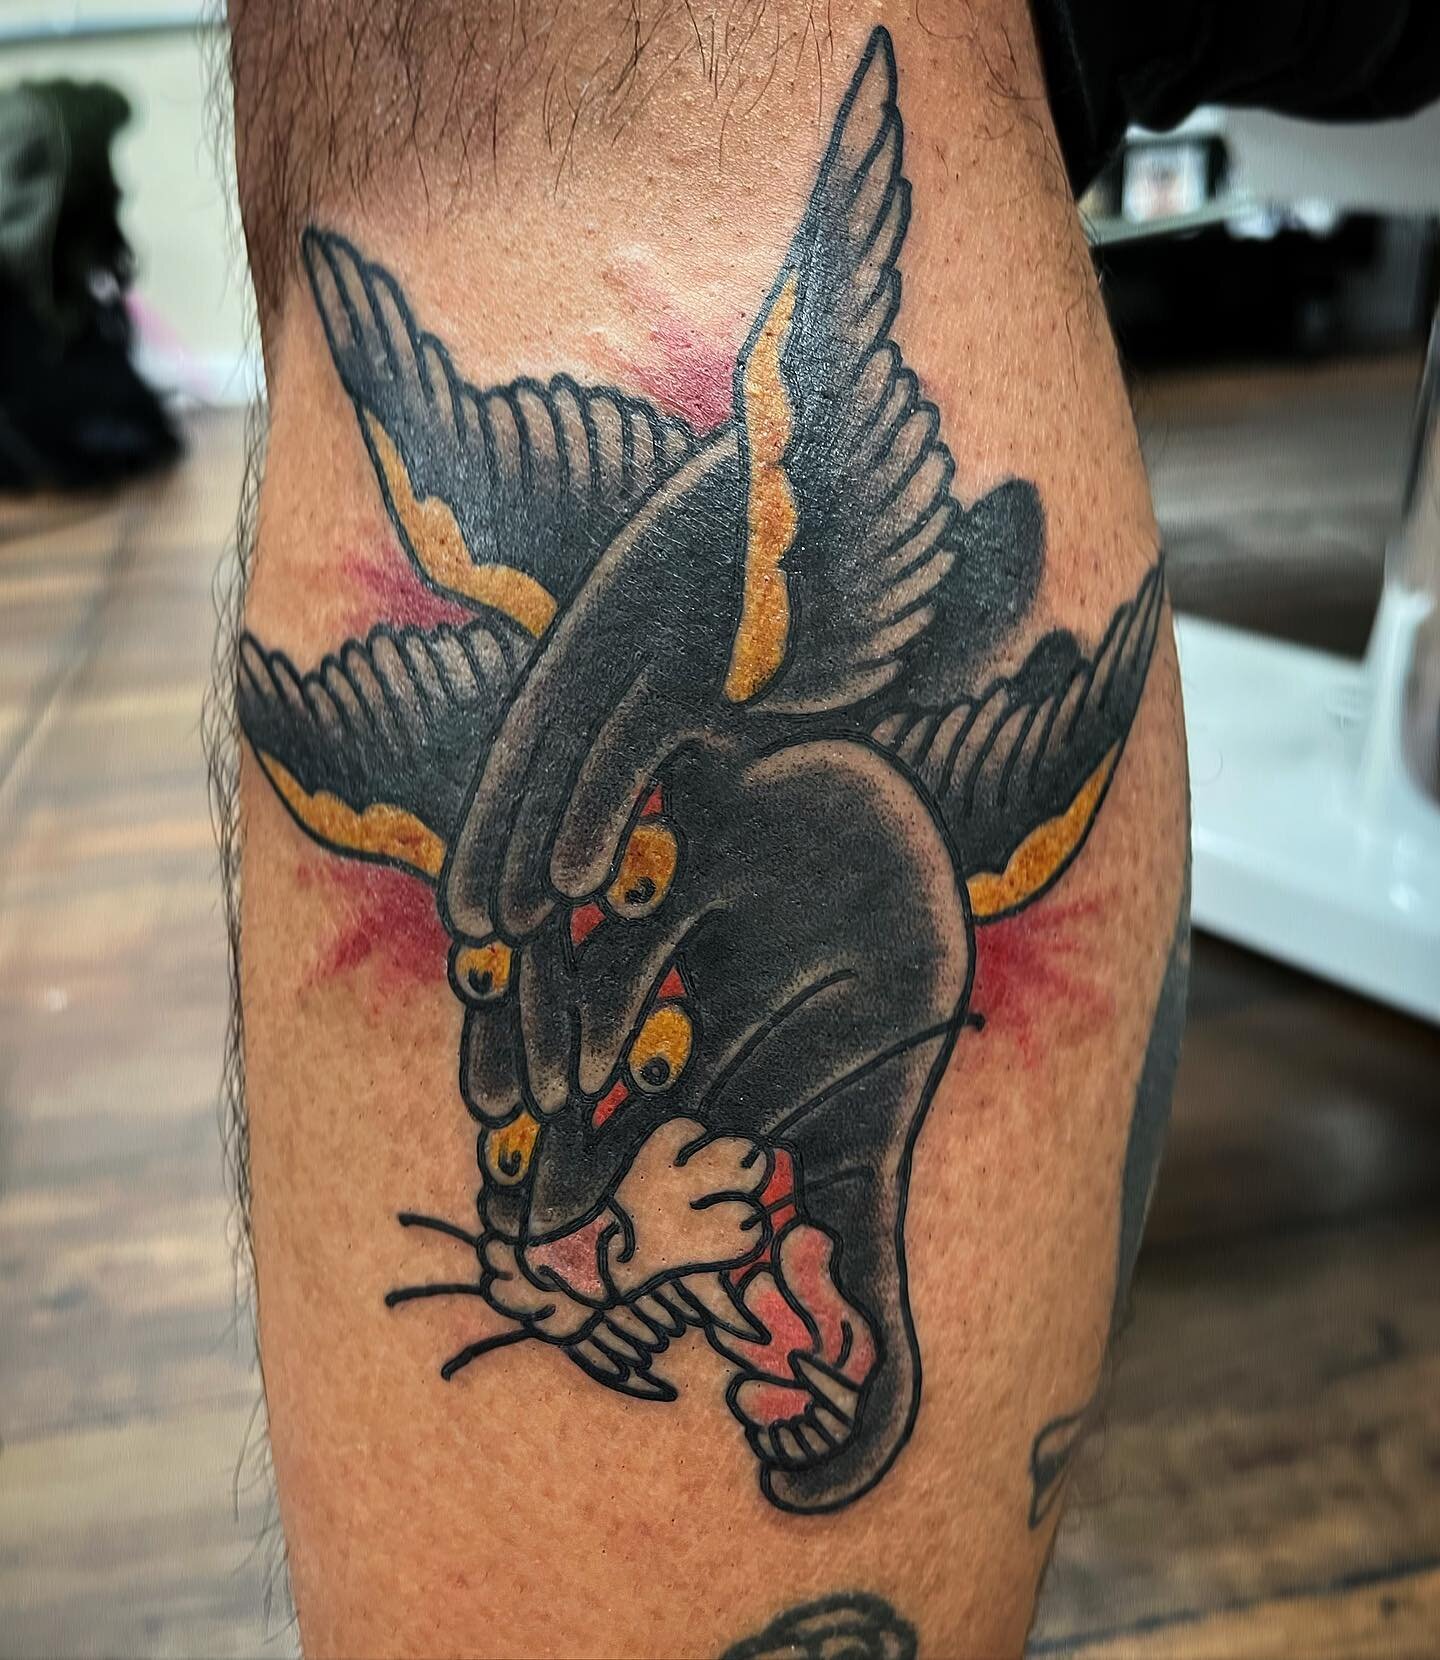 Here&rsquo;s an American traditional inspired panther tattoo that @kd1904 made on @tapateo_ over the weekend!  Great meeting you Aaron.  Thanks so much for trusting us and for the delicious beers! More American Traditional please!  Clementinetattoo.c